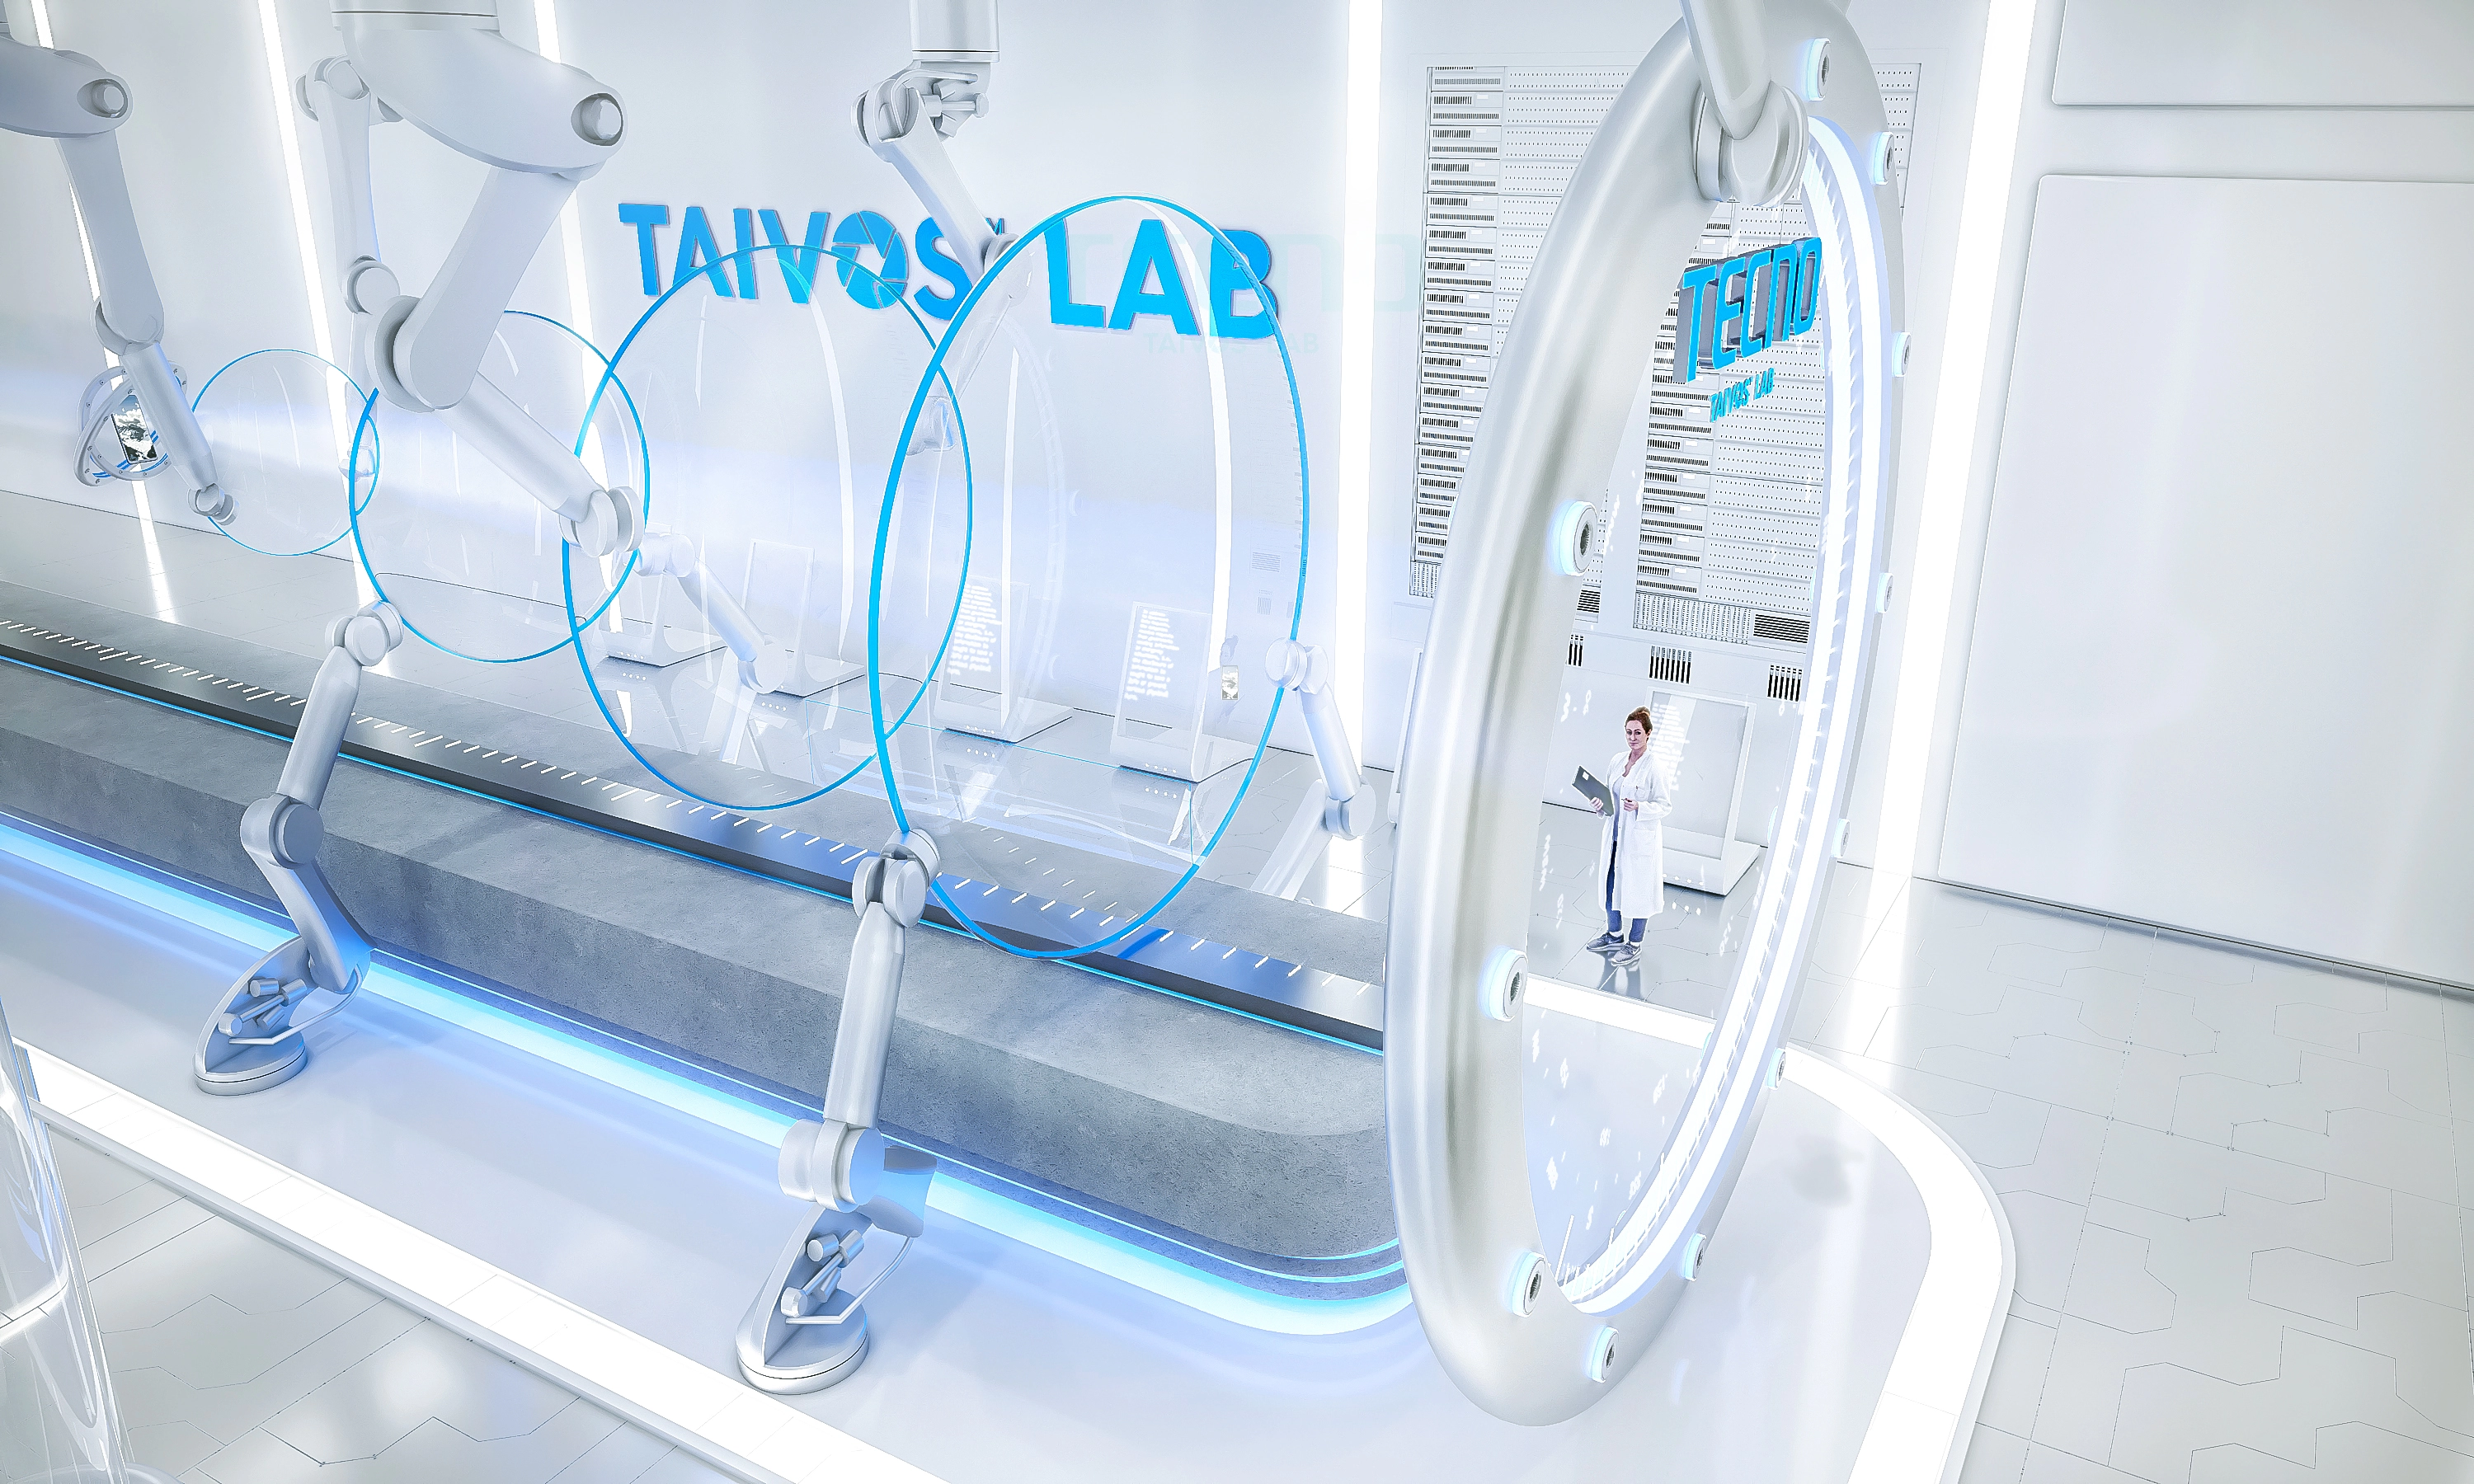 TECNO Imaging LAB-TAIVOS LAB Launched